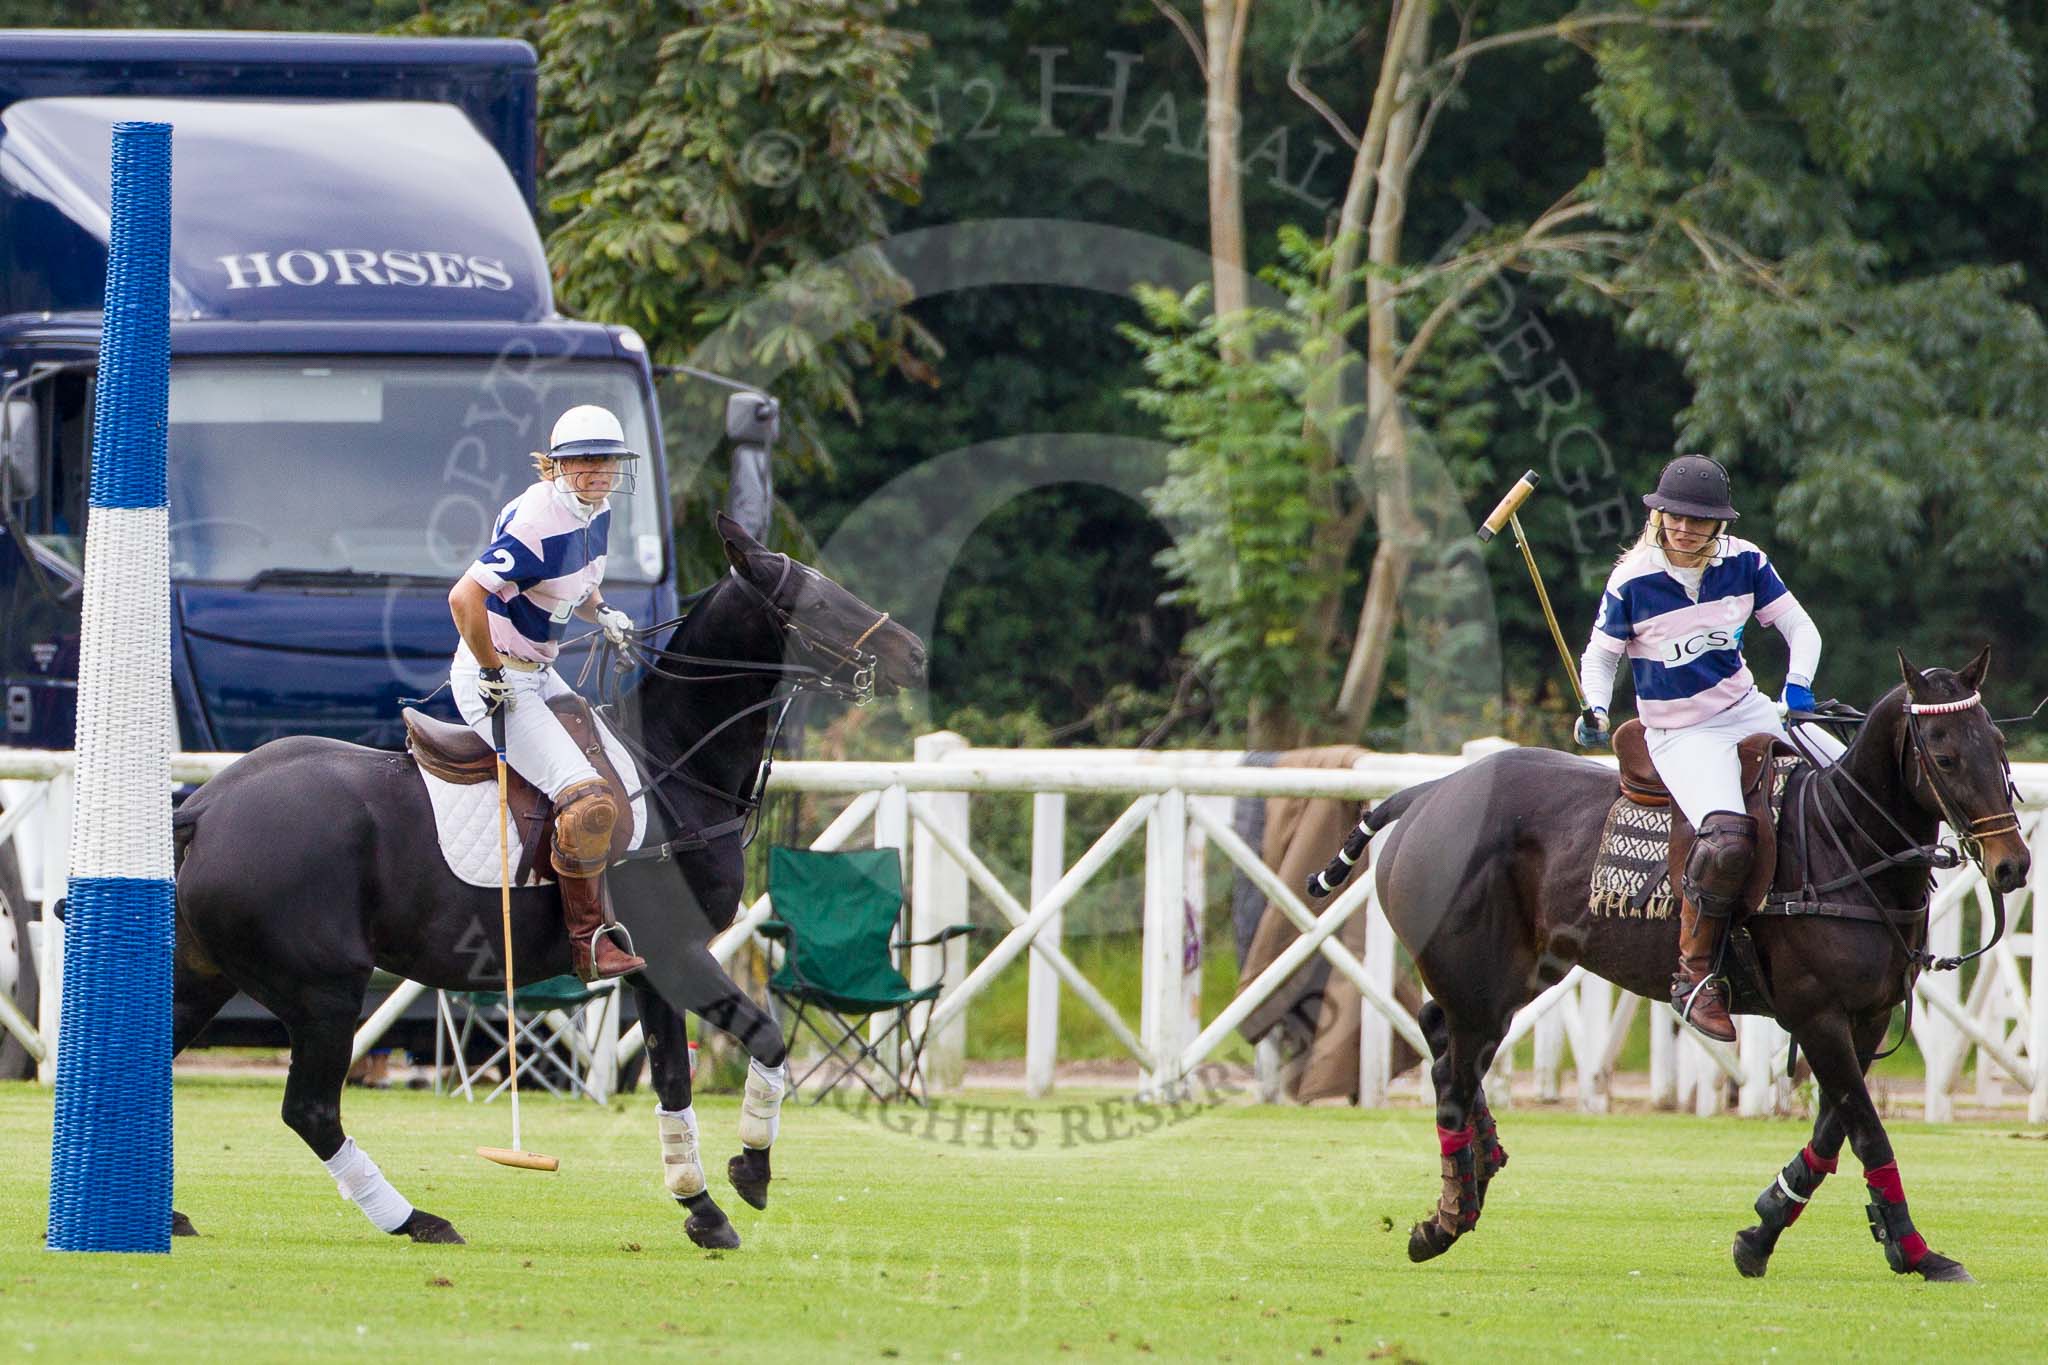 DBPC Polo in the Park 2012: JCS Polo team #2 Louise Coulbeck and #3 Emma Nicolson..
Dallas Burston Polo Club,
Stoneythorpe Estate,
Southam,
Warwickshire,
United Kingdom,
on 16 September 2012 at 11:14, image #74